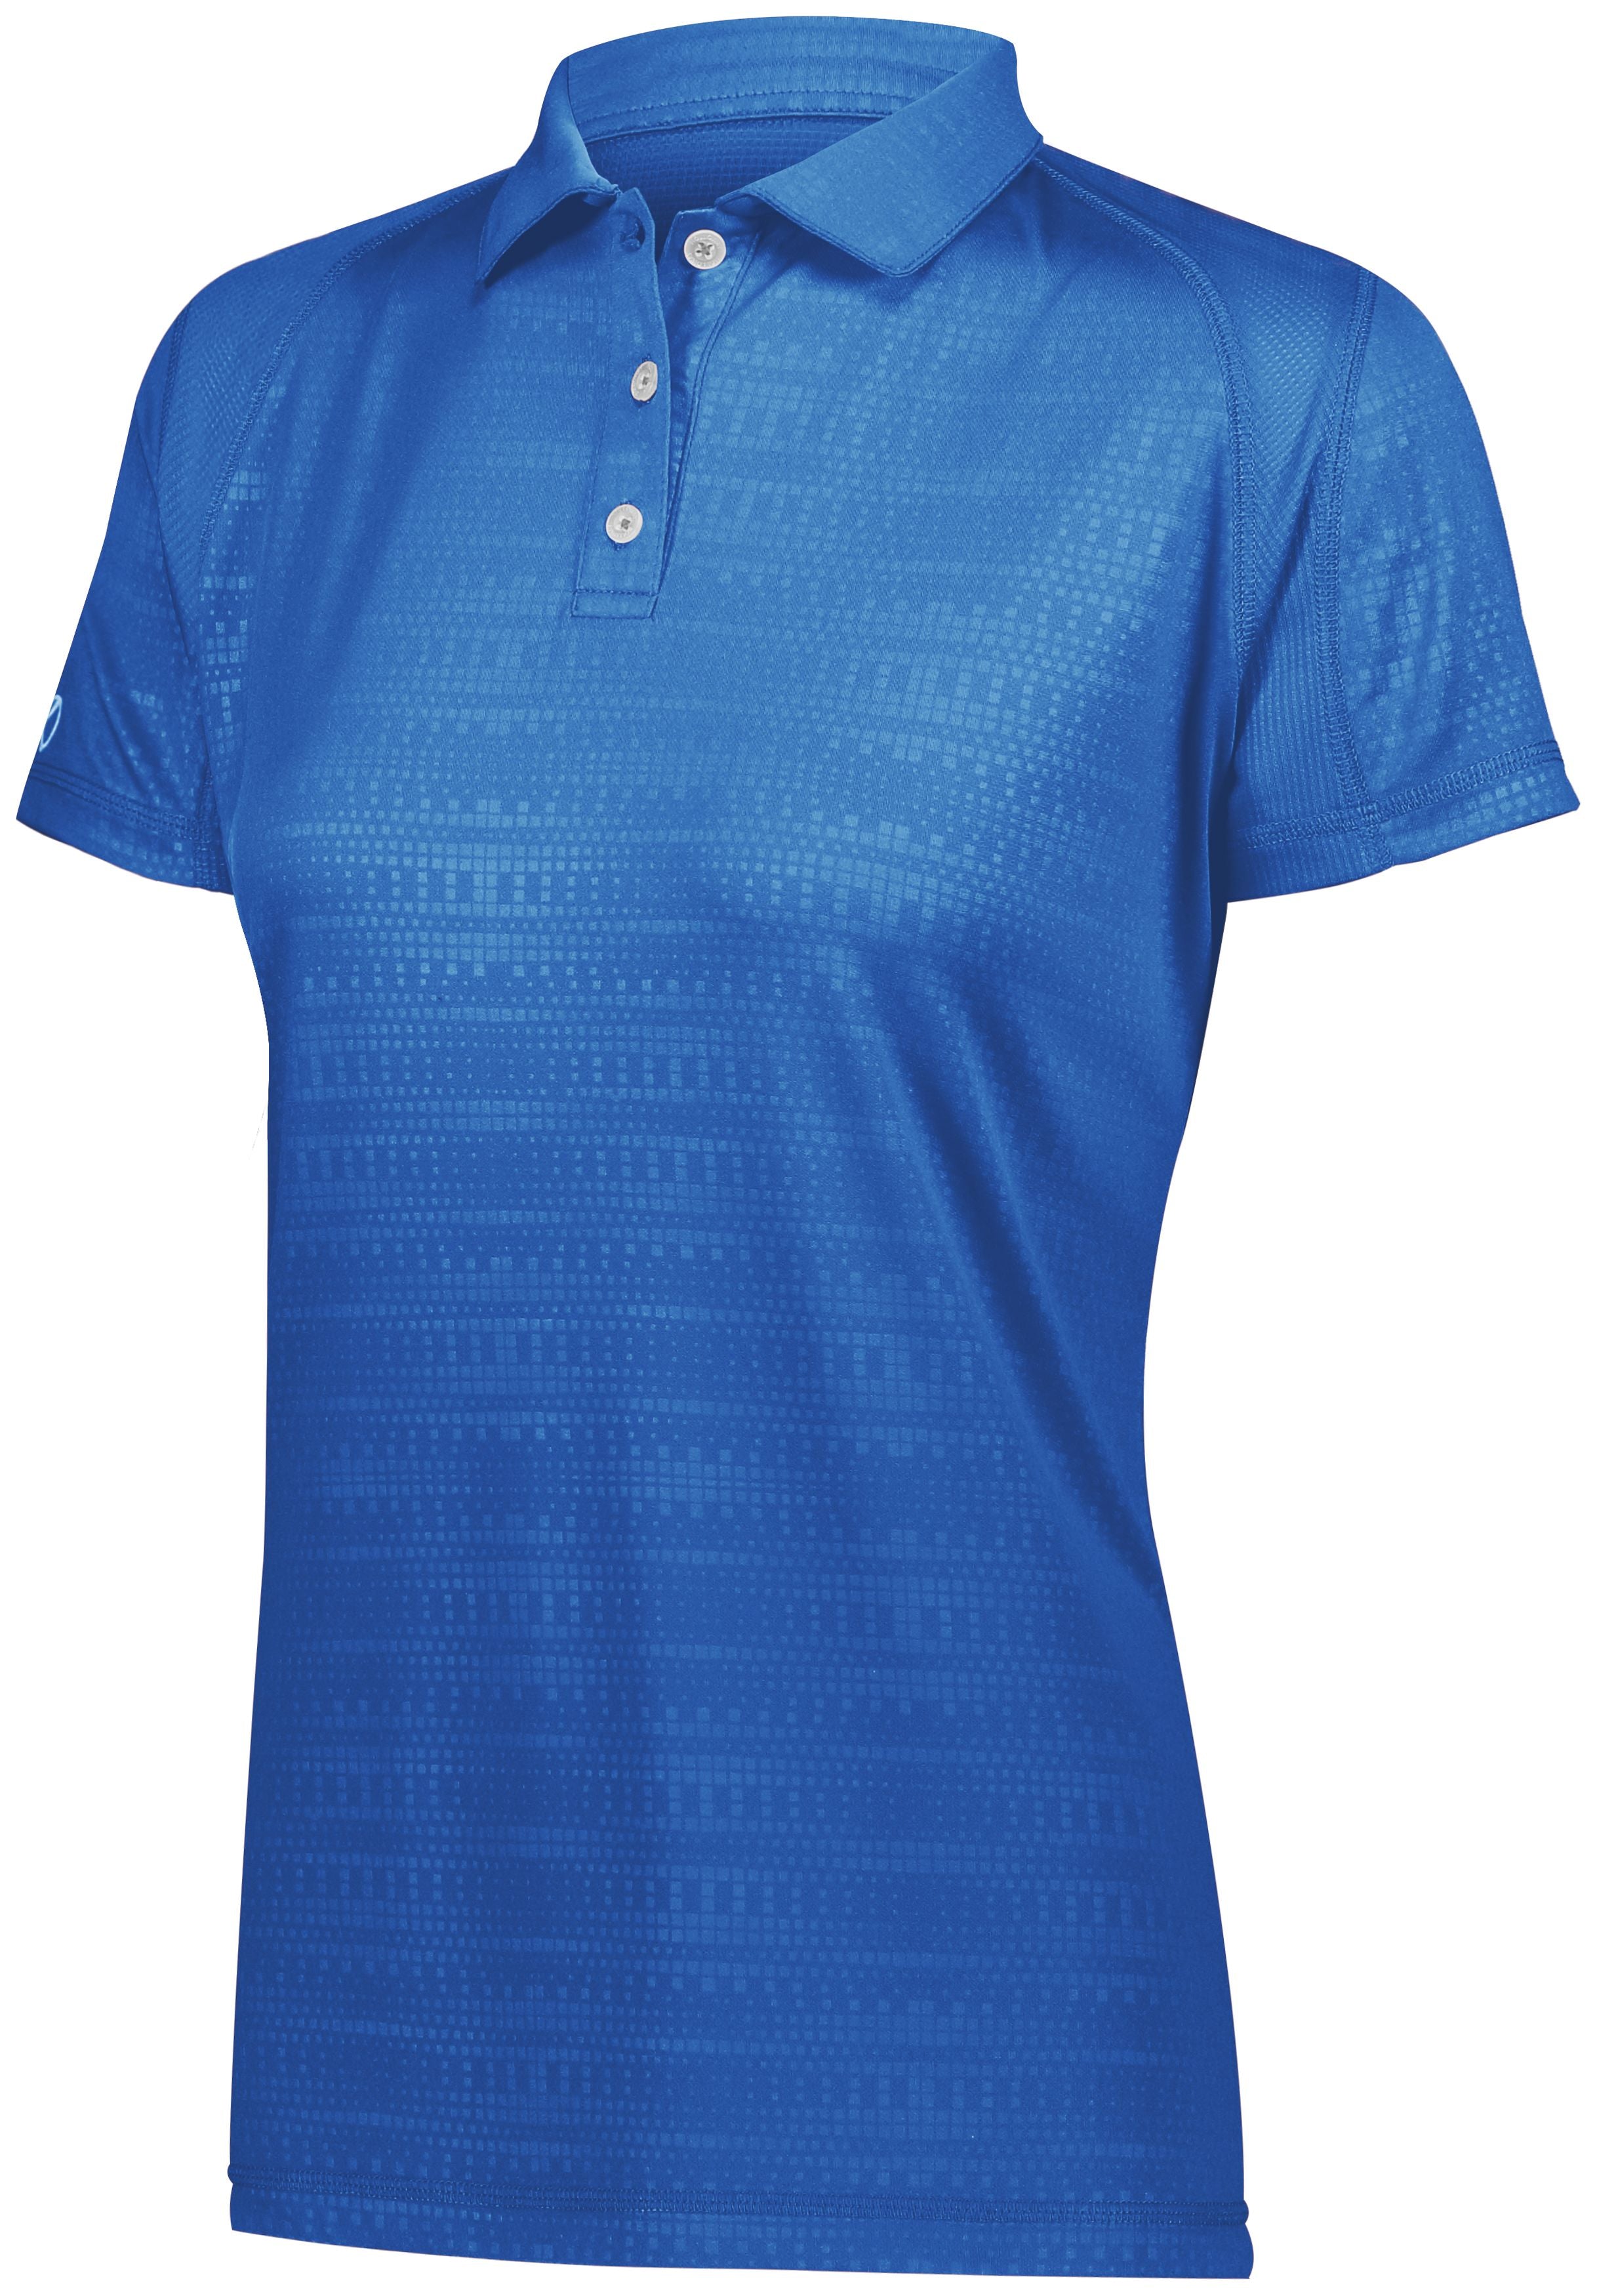 Holloway Ladies Converge Polo in Royal  -Part of the Ladies, Ladies-Polo, Polos, Holloway, Shirts, Converge-Collection product lines at KanaleyCreations.com